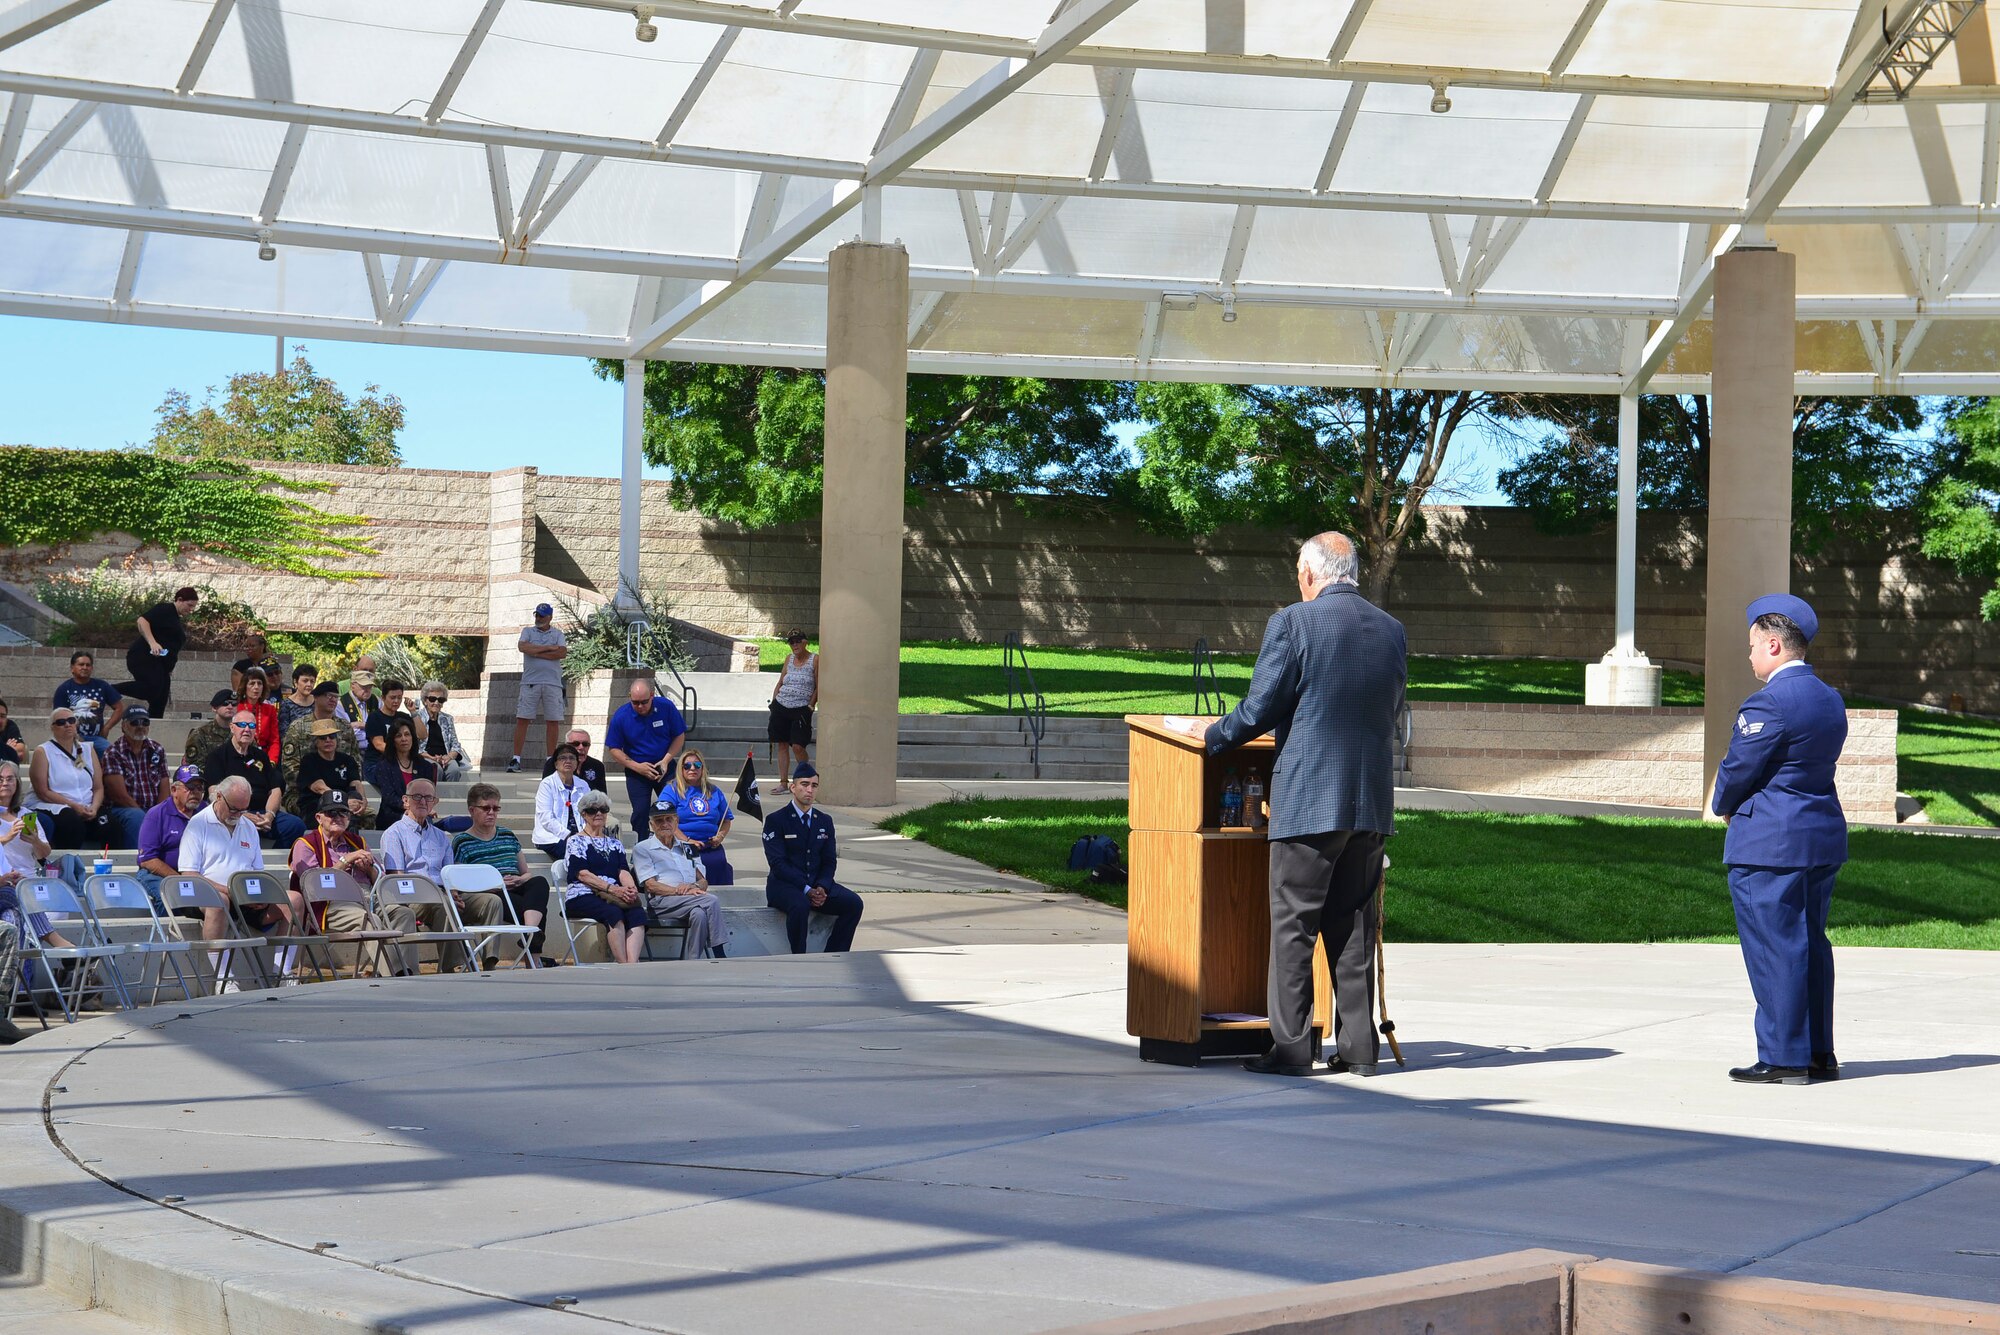 Maj. Gen. (Ret.) Melvyn Montano, guest speaker tells the crowd a story during the POW/MIA ceremony in Albuquerque, N.M., Sept. 20, 2019. Montano spoke about memory he recalled during his time serving. (U.S. Air Force photo by Senior Airman Enrique Barceló)